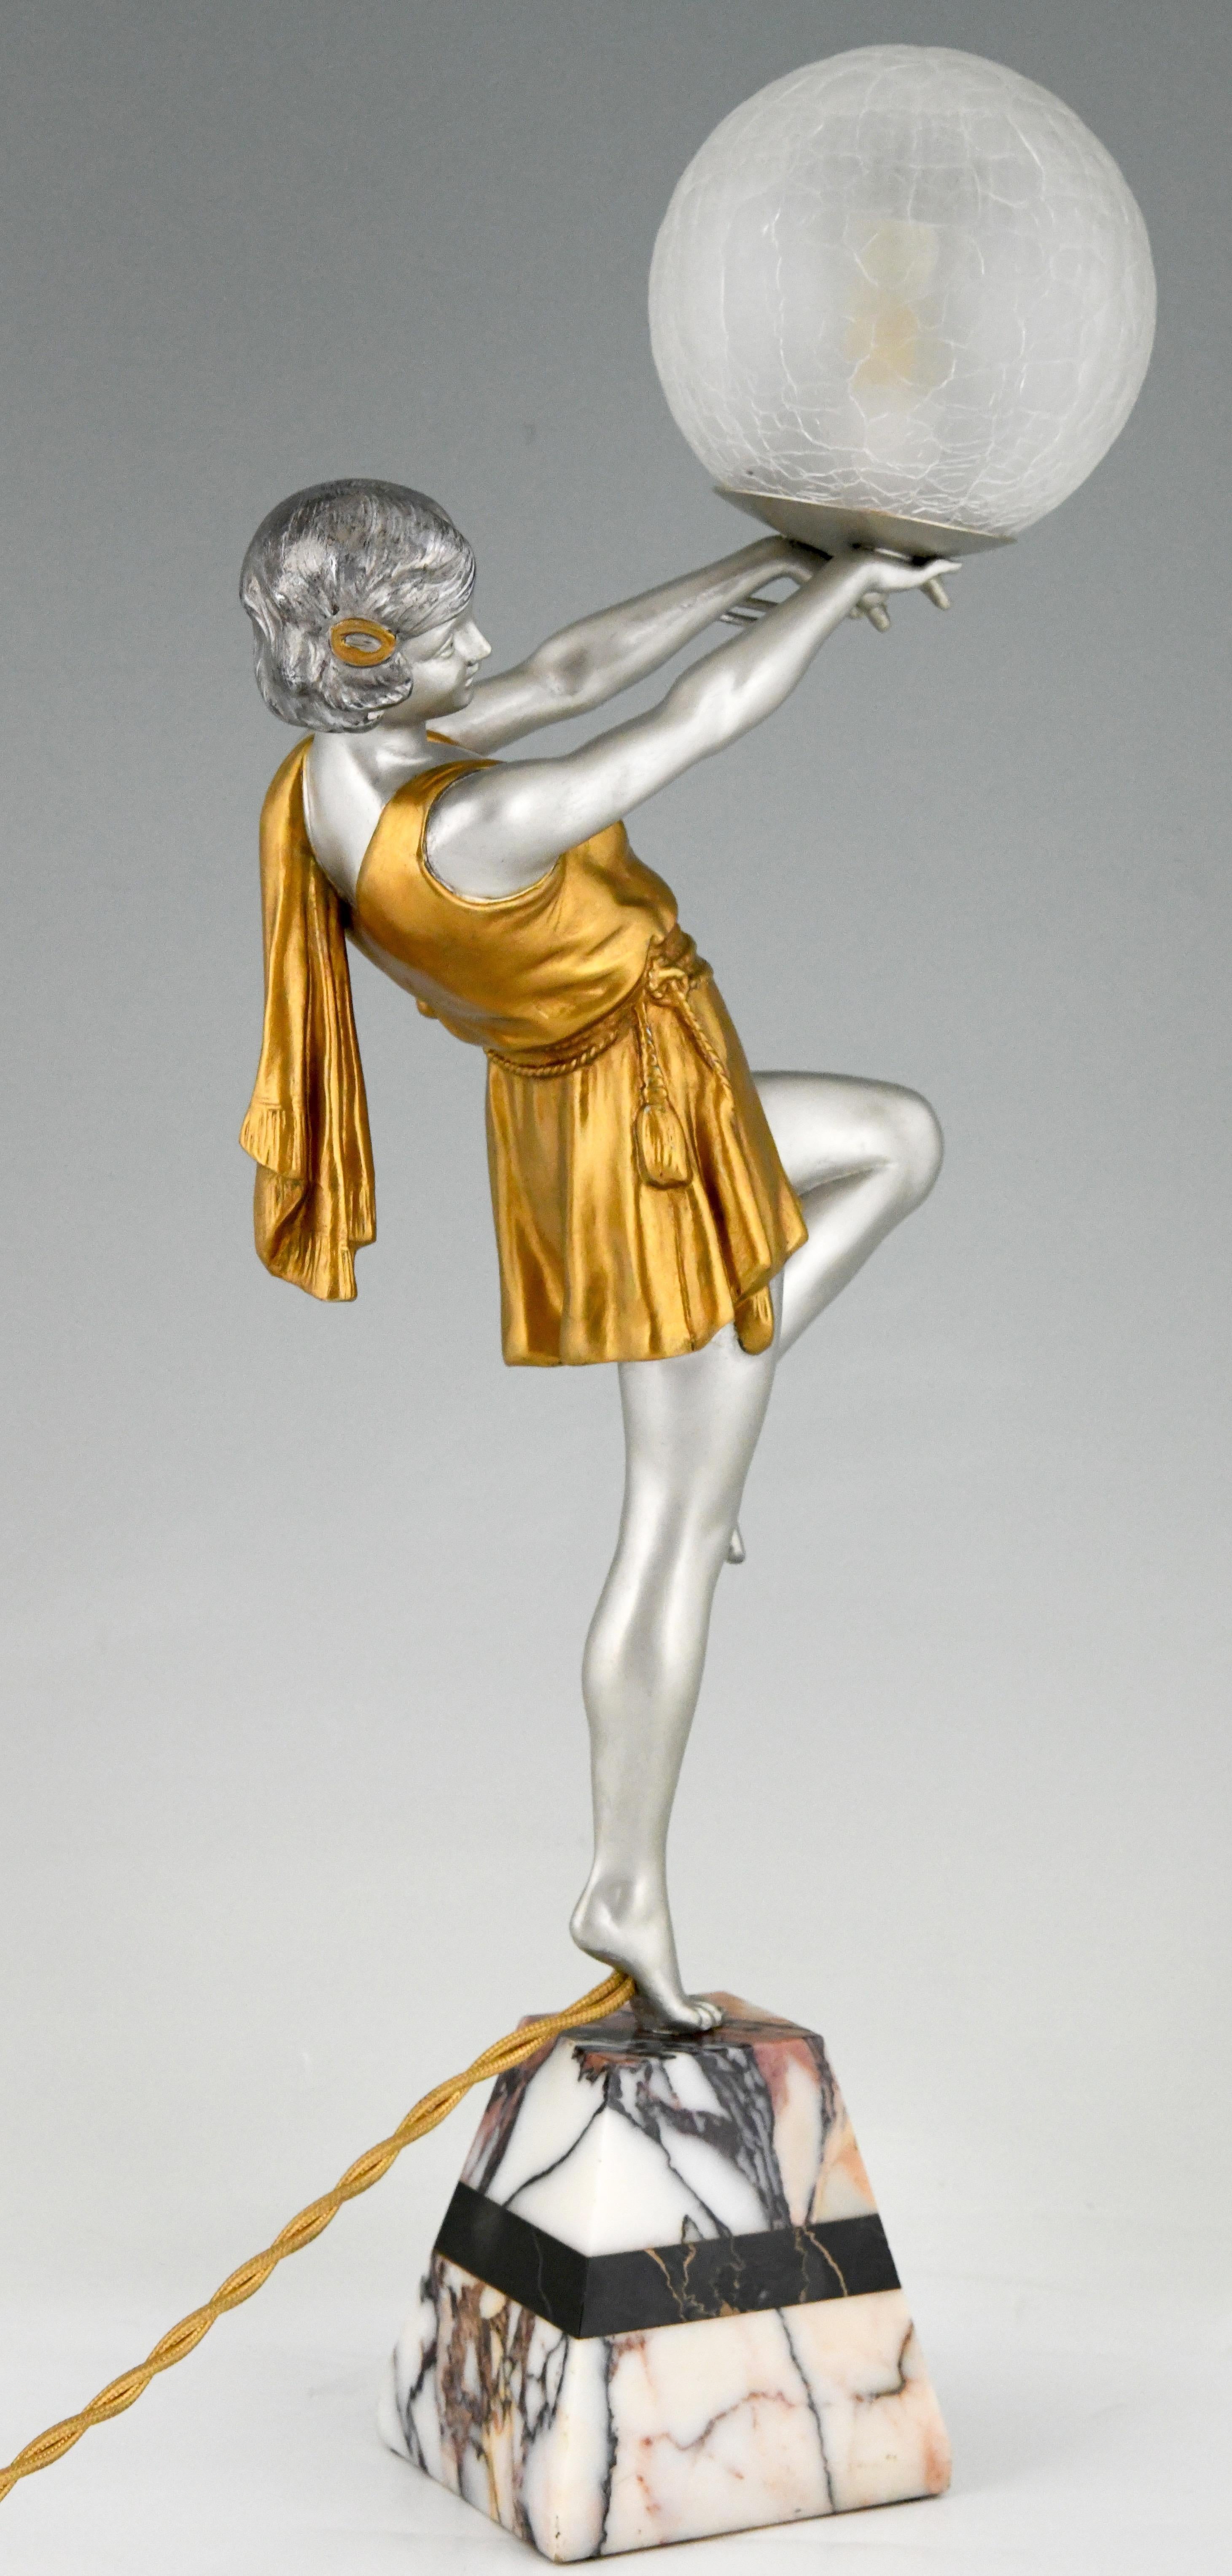 Mid-20th Century Art Deco Lamp Lady Holding a Ball Emile Carlier, France, 1930